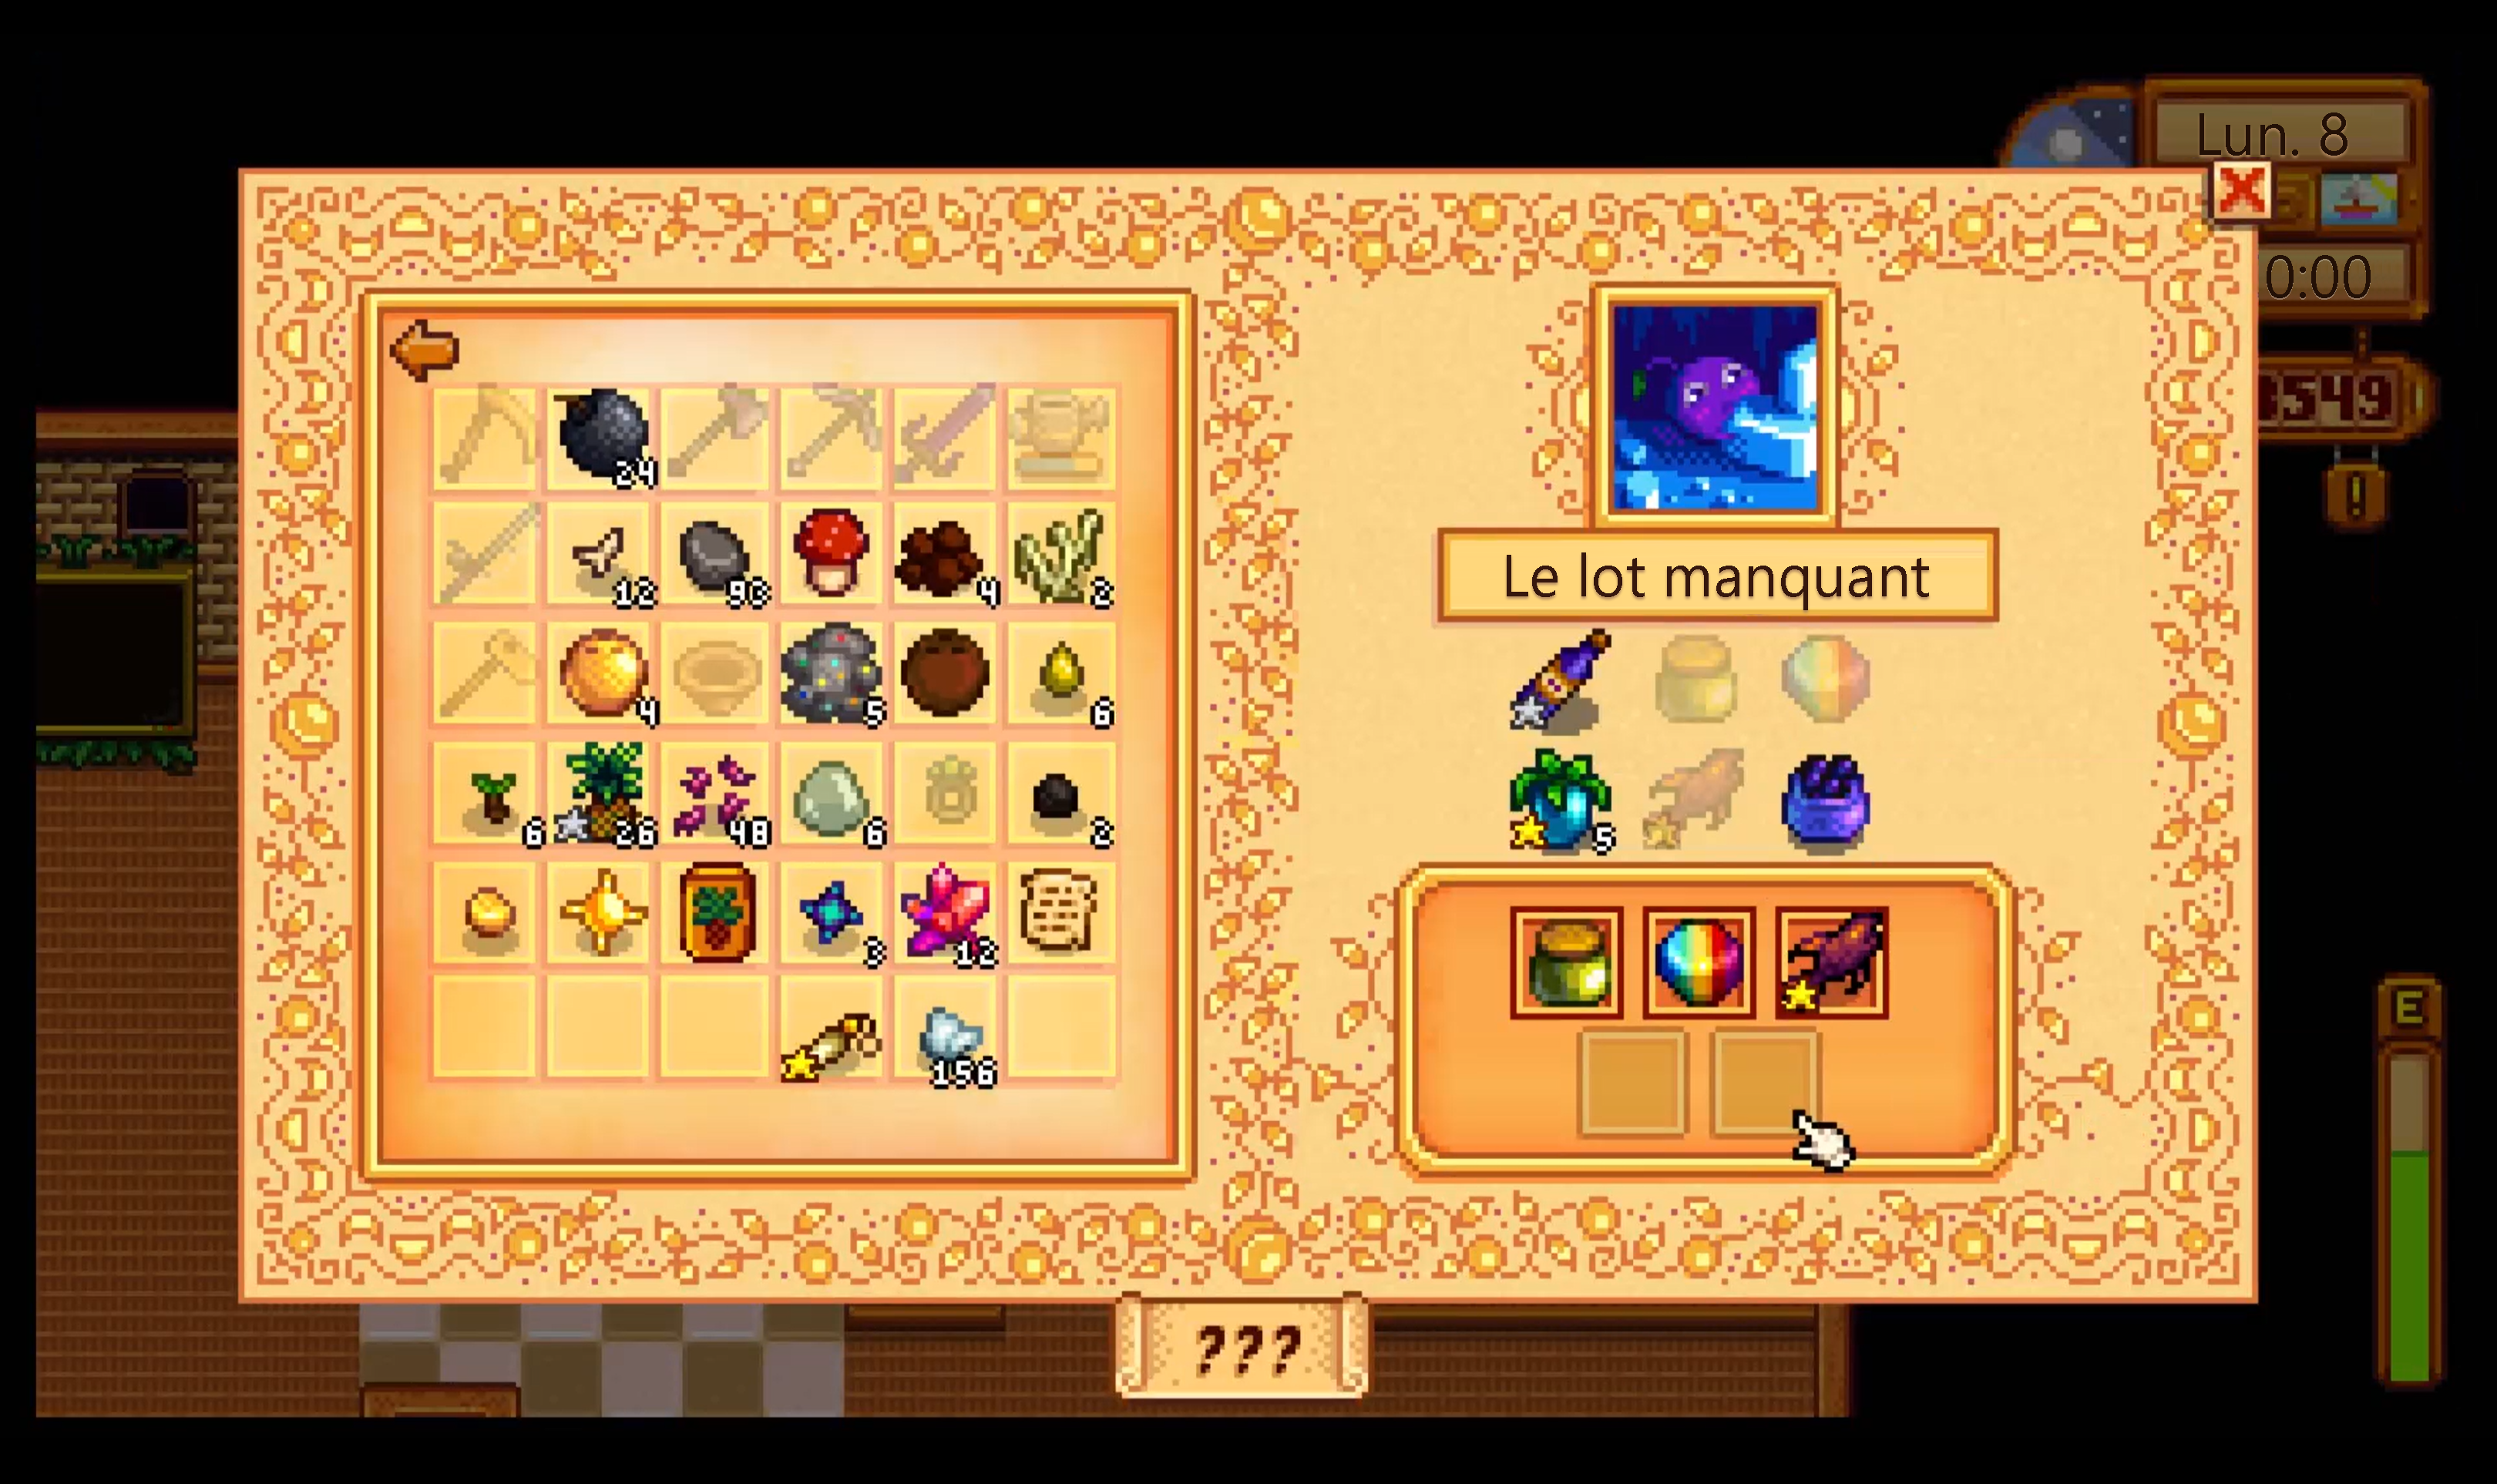 Screenshot that shows the interface in Stardew Valley for The Missing Bundle in-game activity.